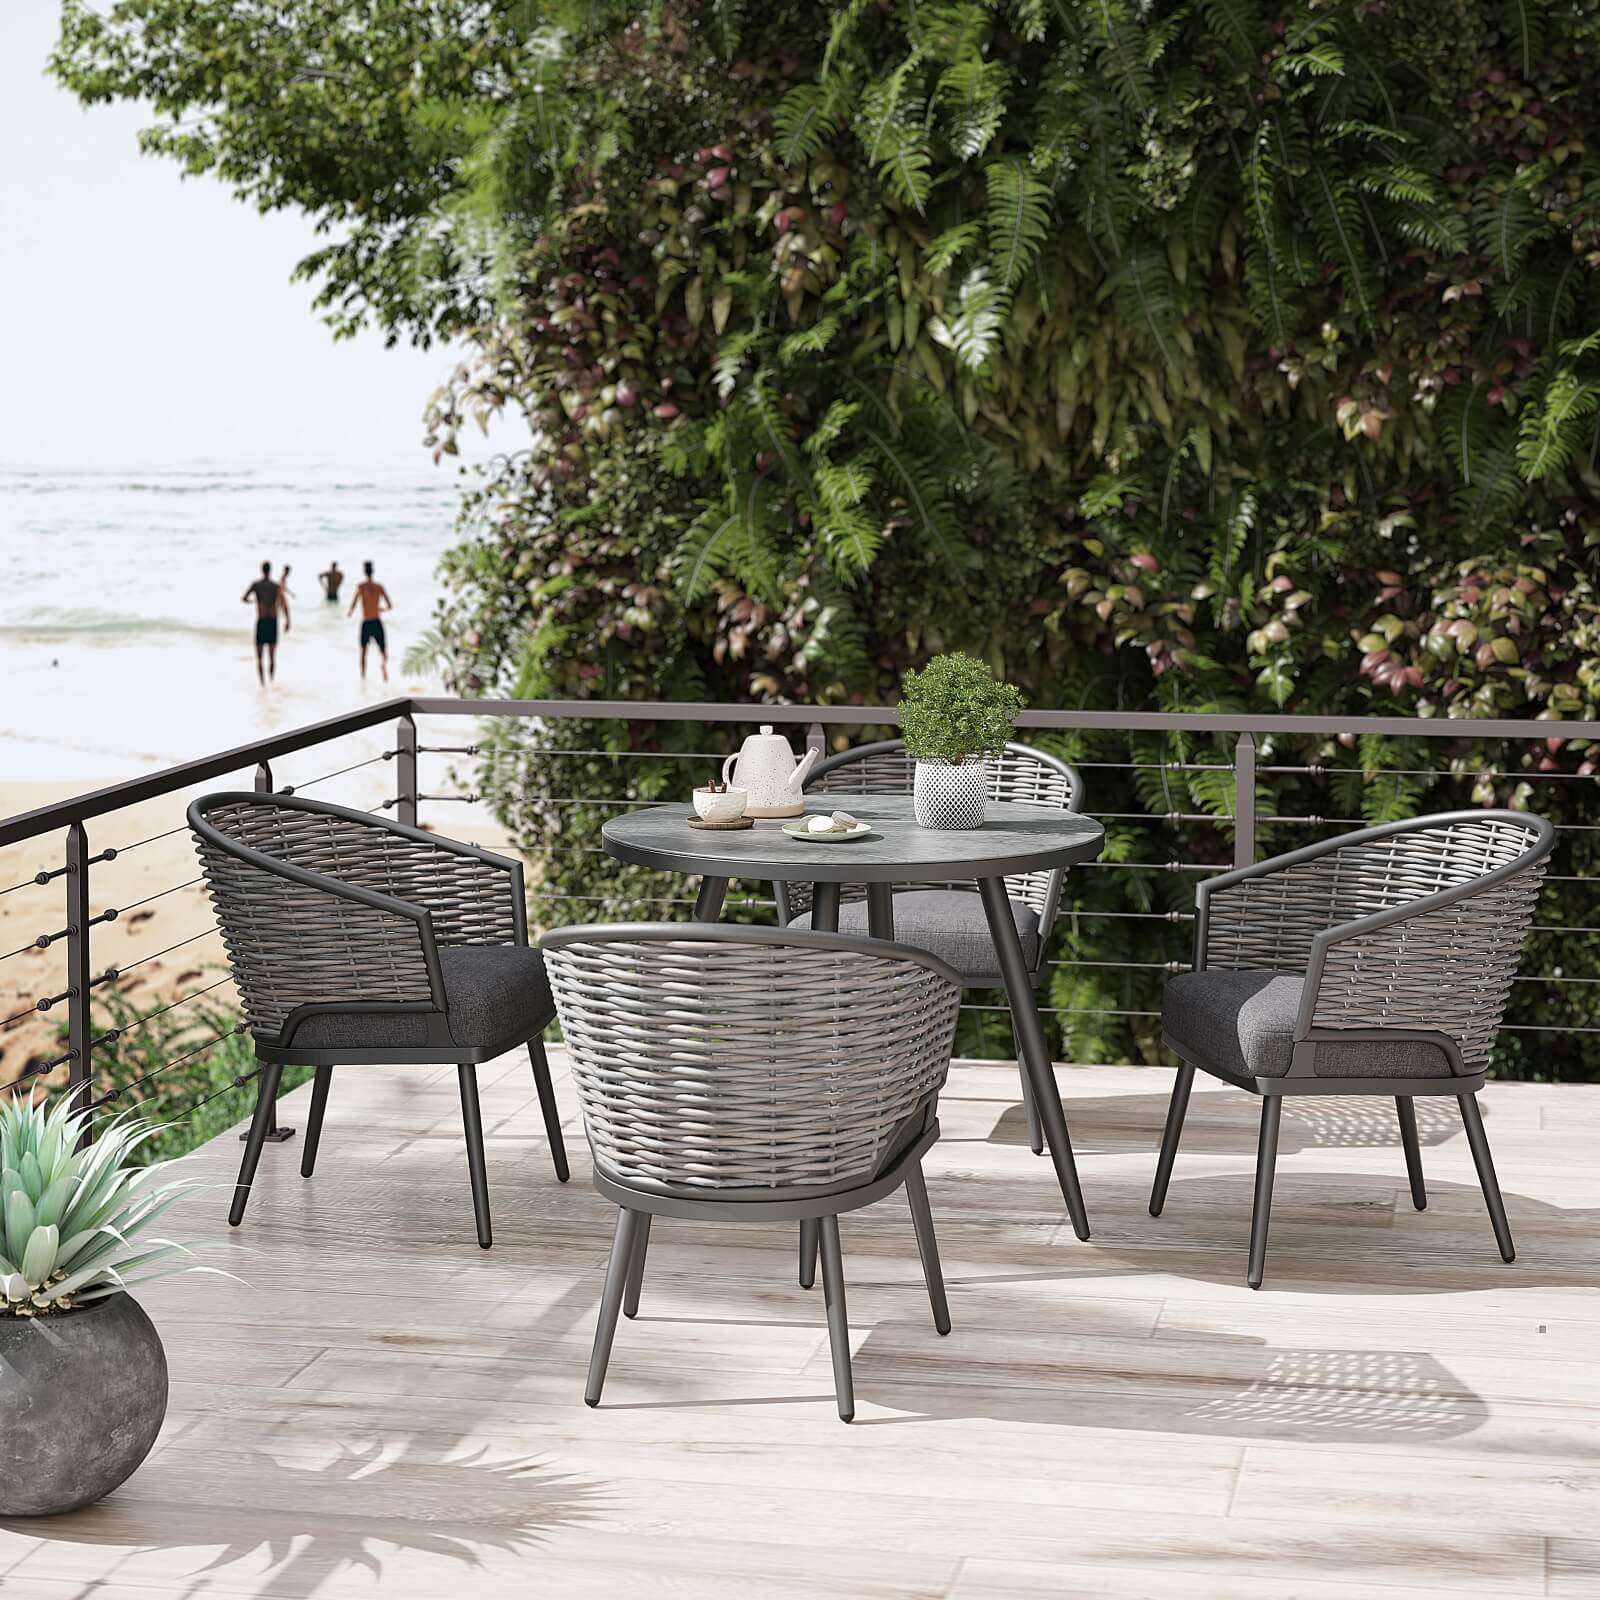 Burano Modern HDPE Wicker Outdoor Furniture, Grey wicker outdoor Dining Set with aluminum frame, 4 wicker chairs with grey cushions , 1 Round aluminum Dining Table - Jardina Furniture